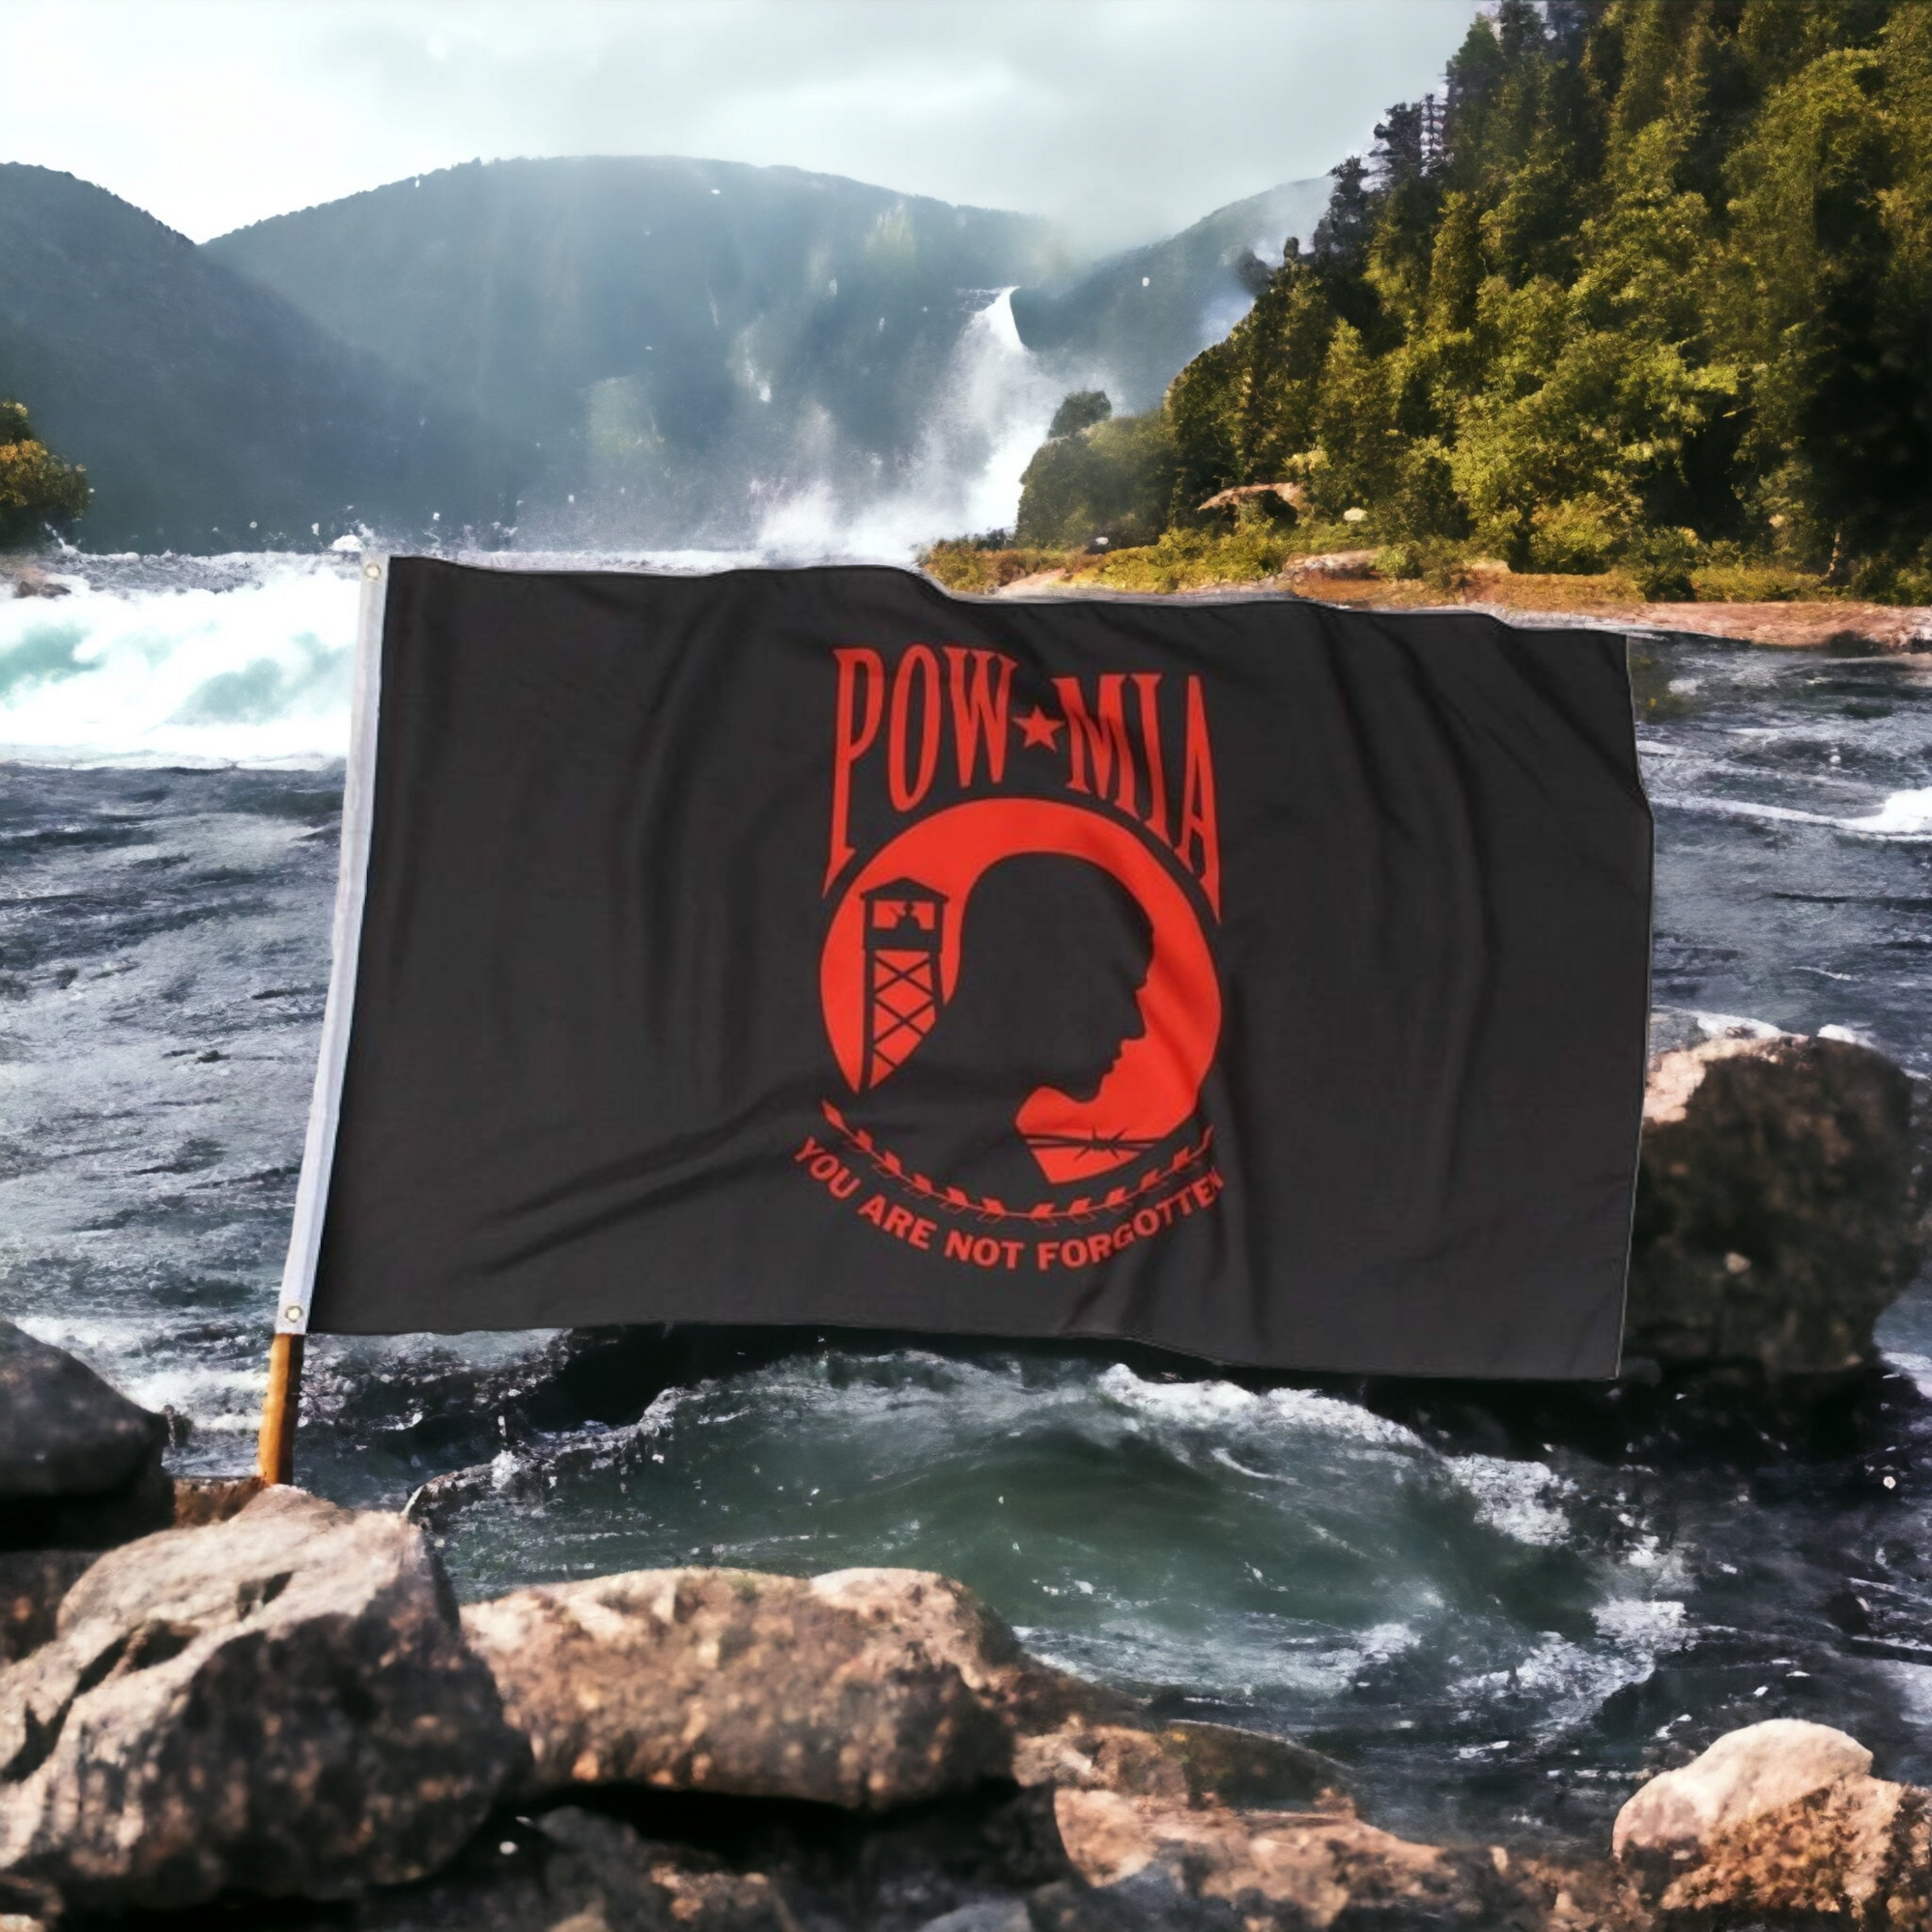 Black and Red POW Flag